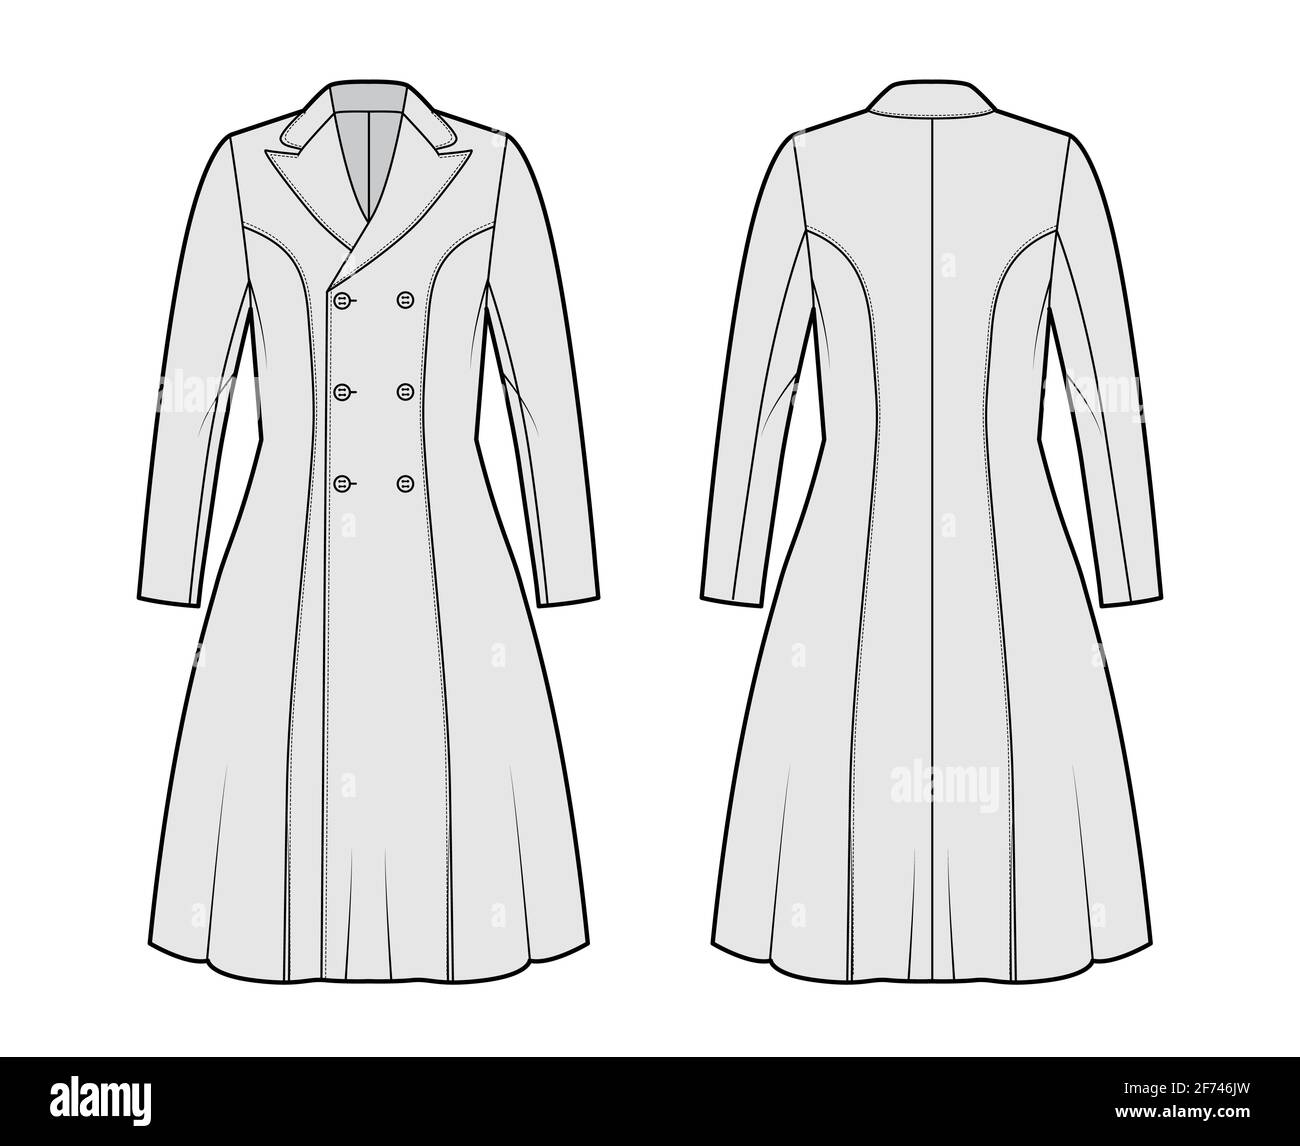 Princess line coat technical fashion illustration with double breasted, long sleeves, peak lapel collar, knee length. Flat jacket template front, back, grey color style. Women, men, unisex CAD mockup Stock Vector